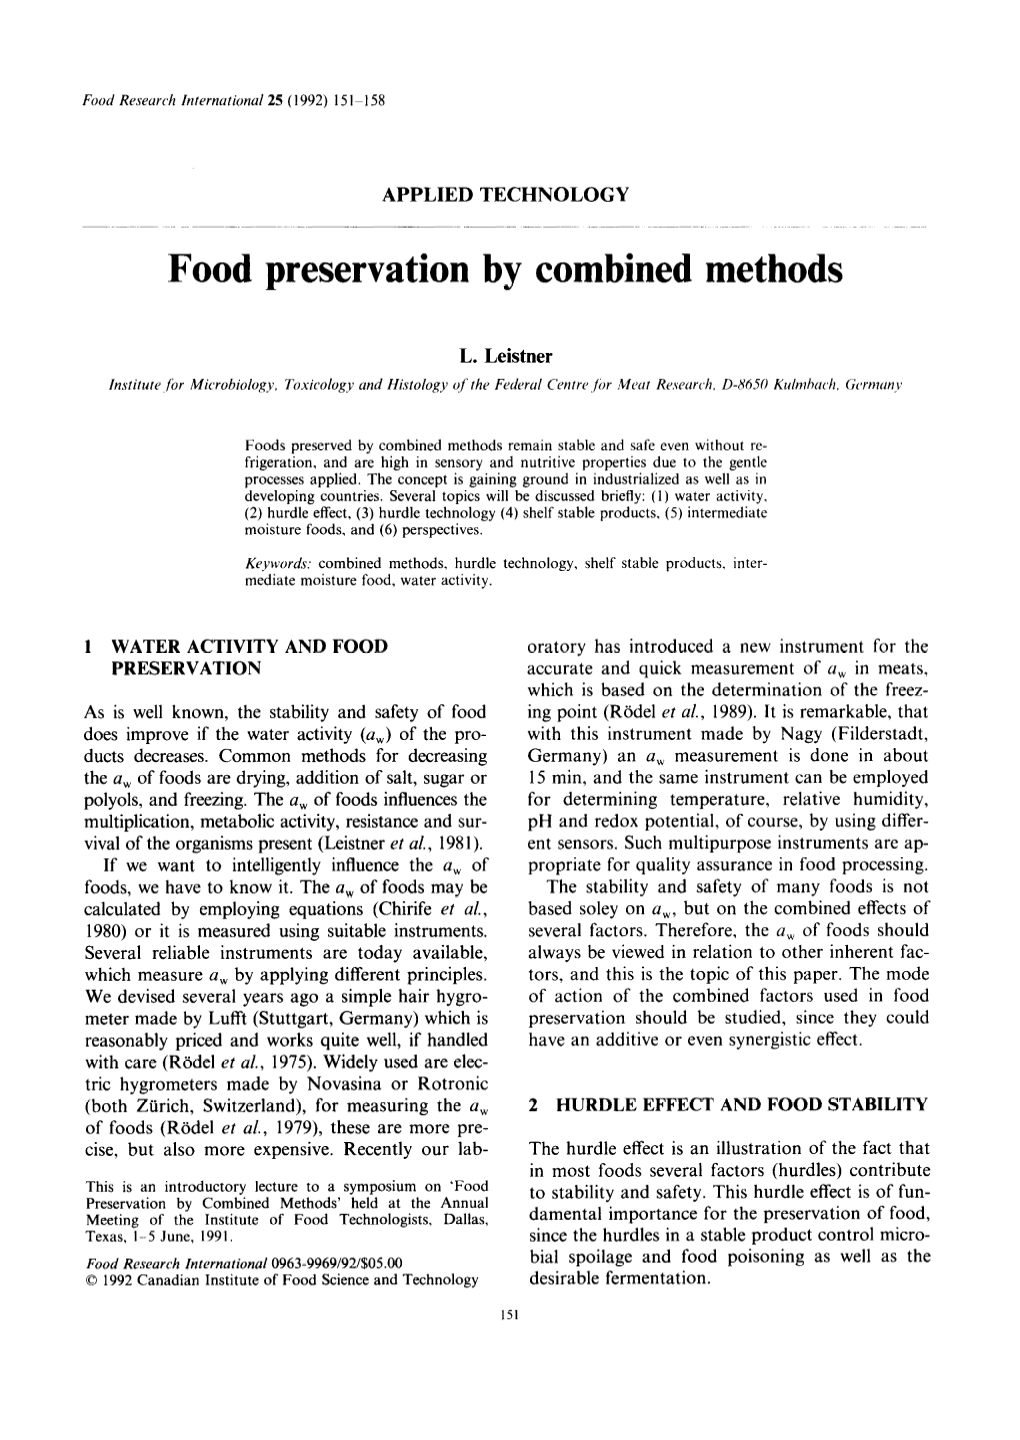 Food Preservation by Combined Methods